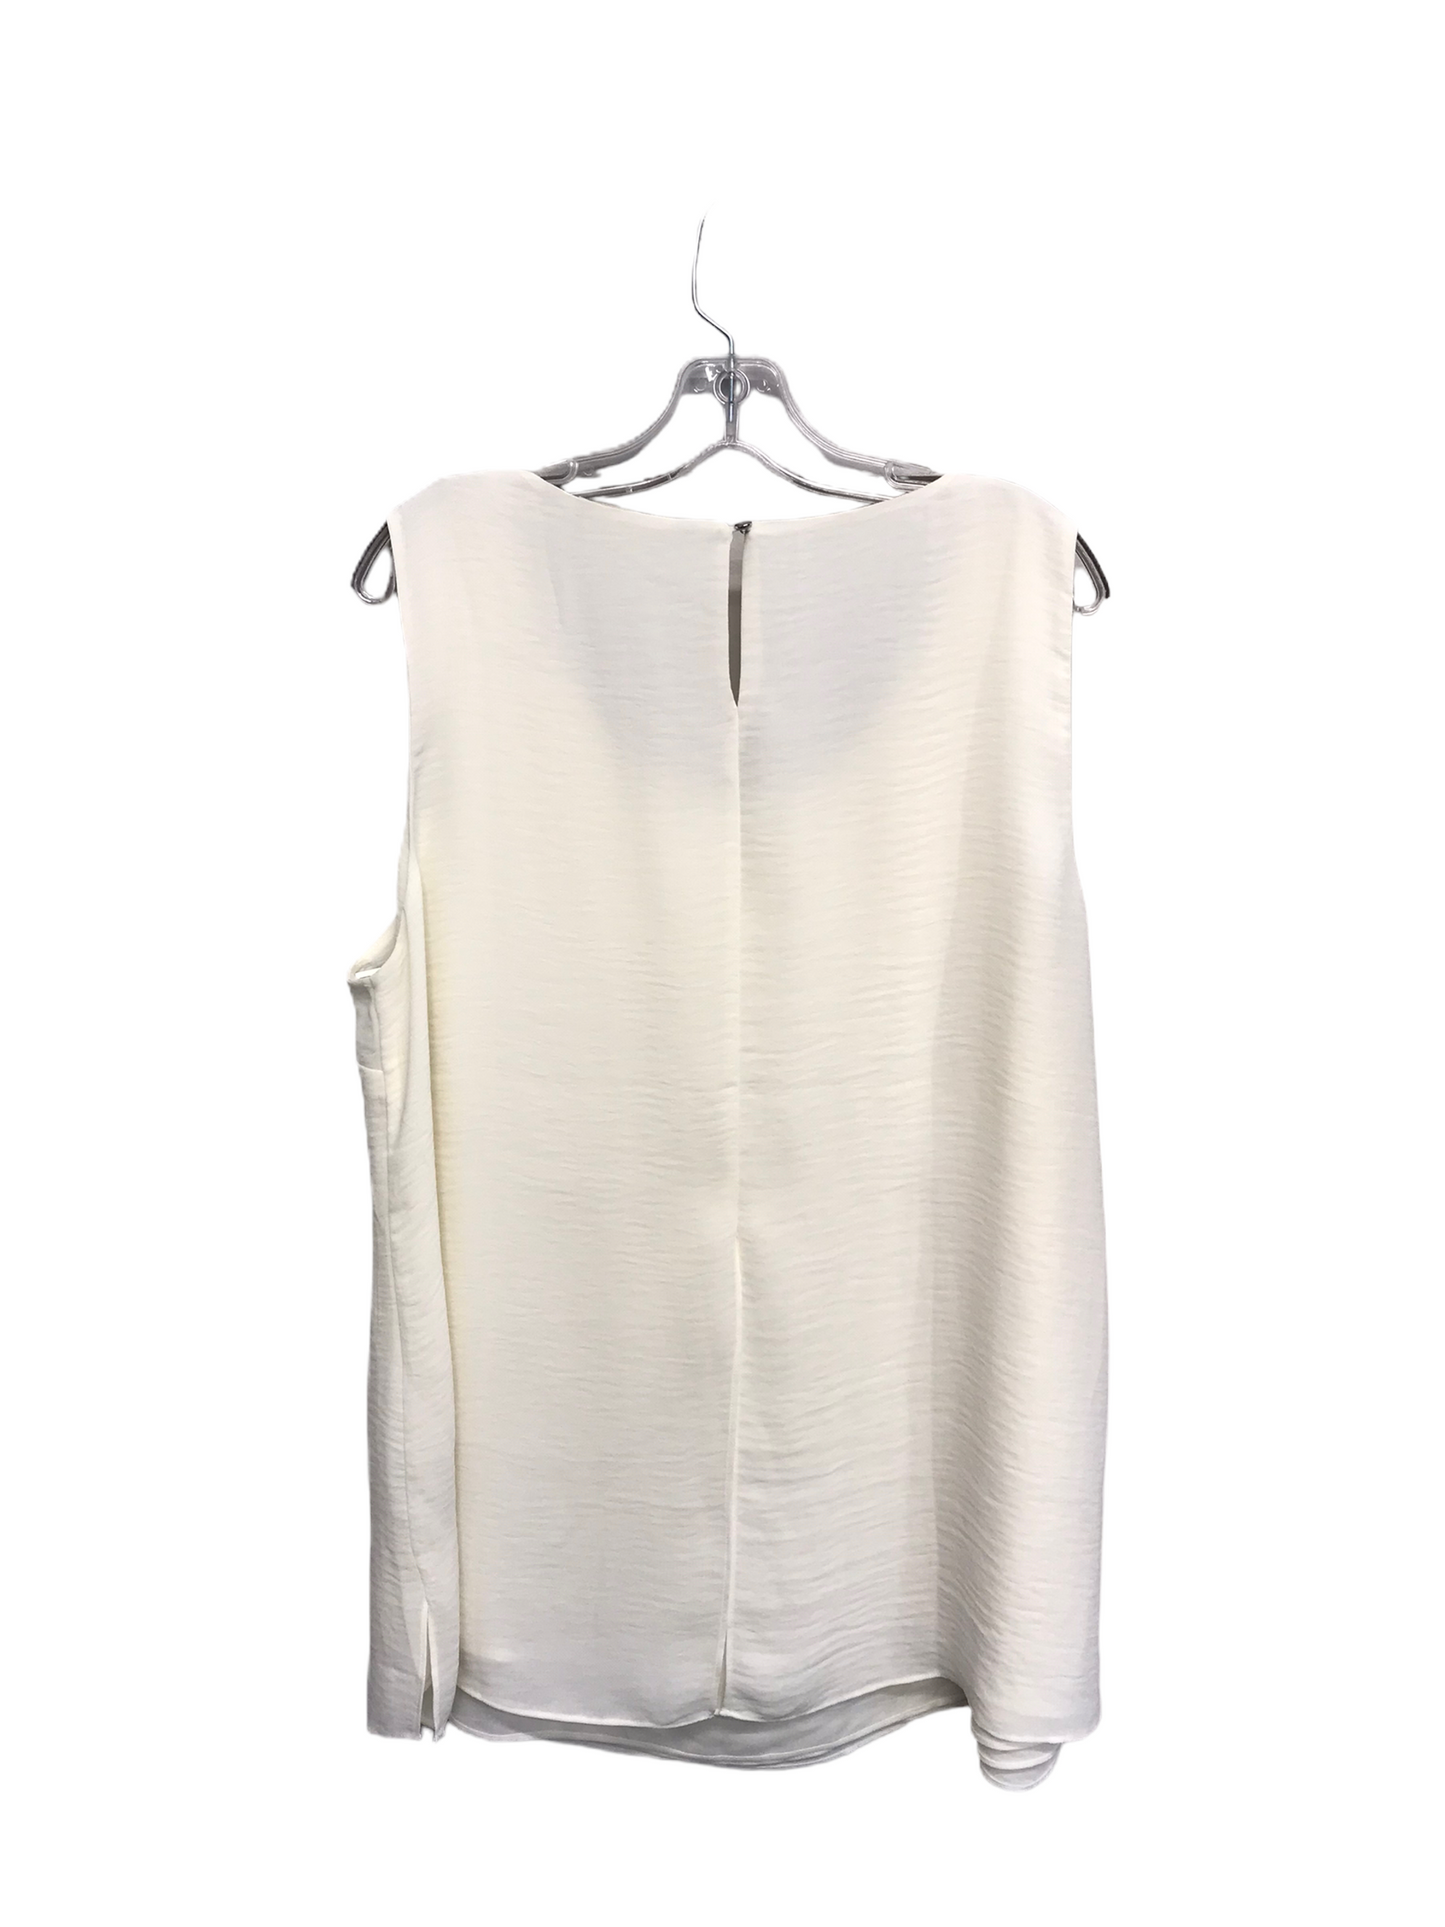 Cream Top Sleeveless By Soft Surroundings, Size: 1x